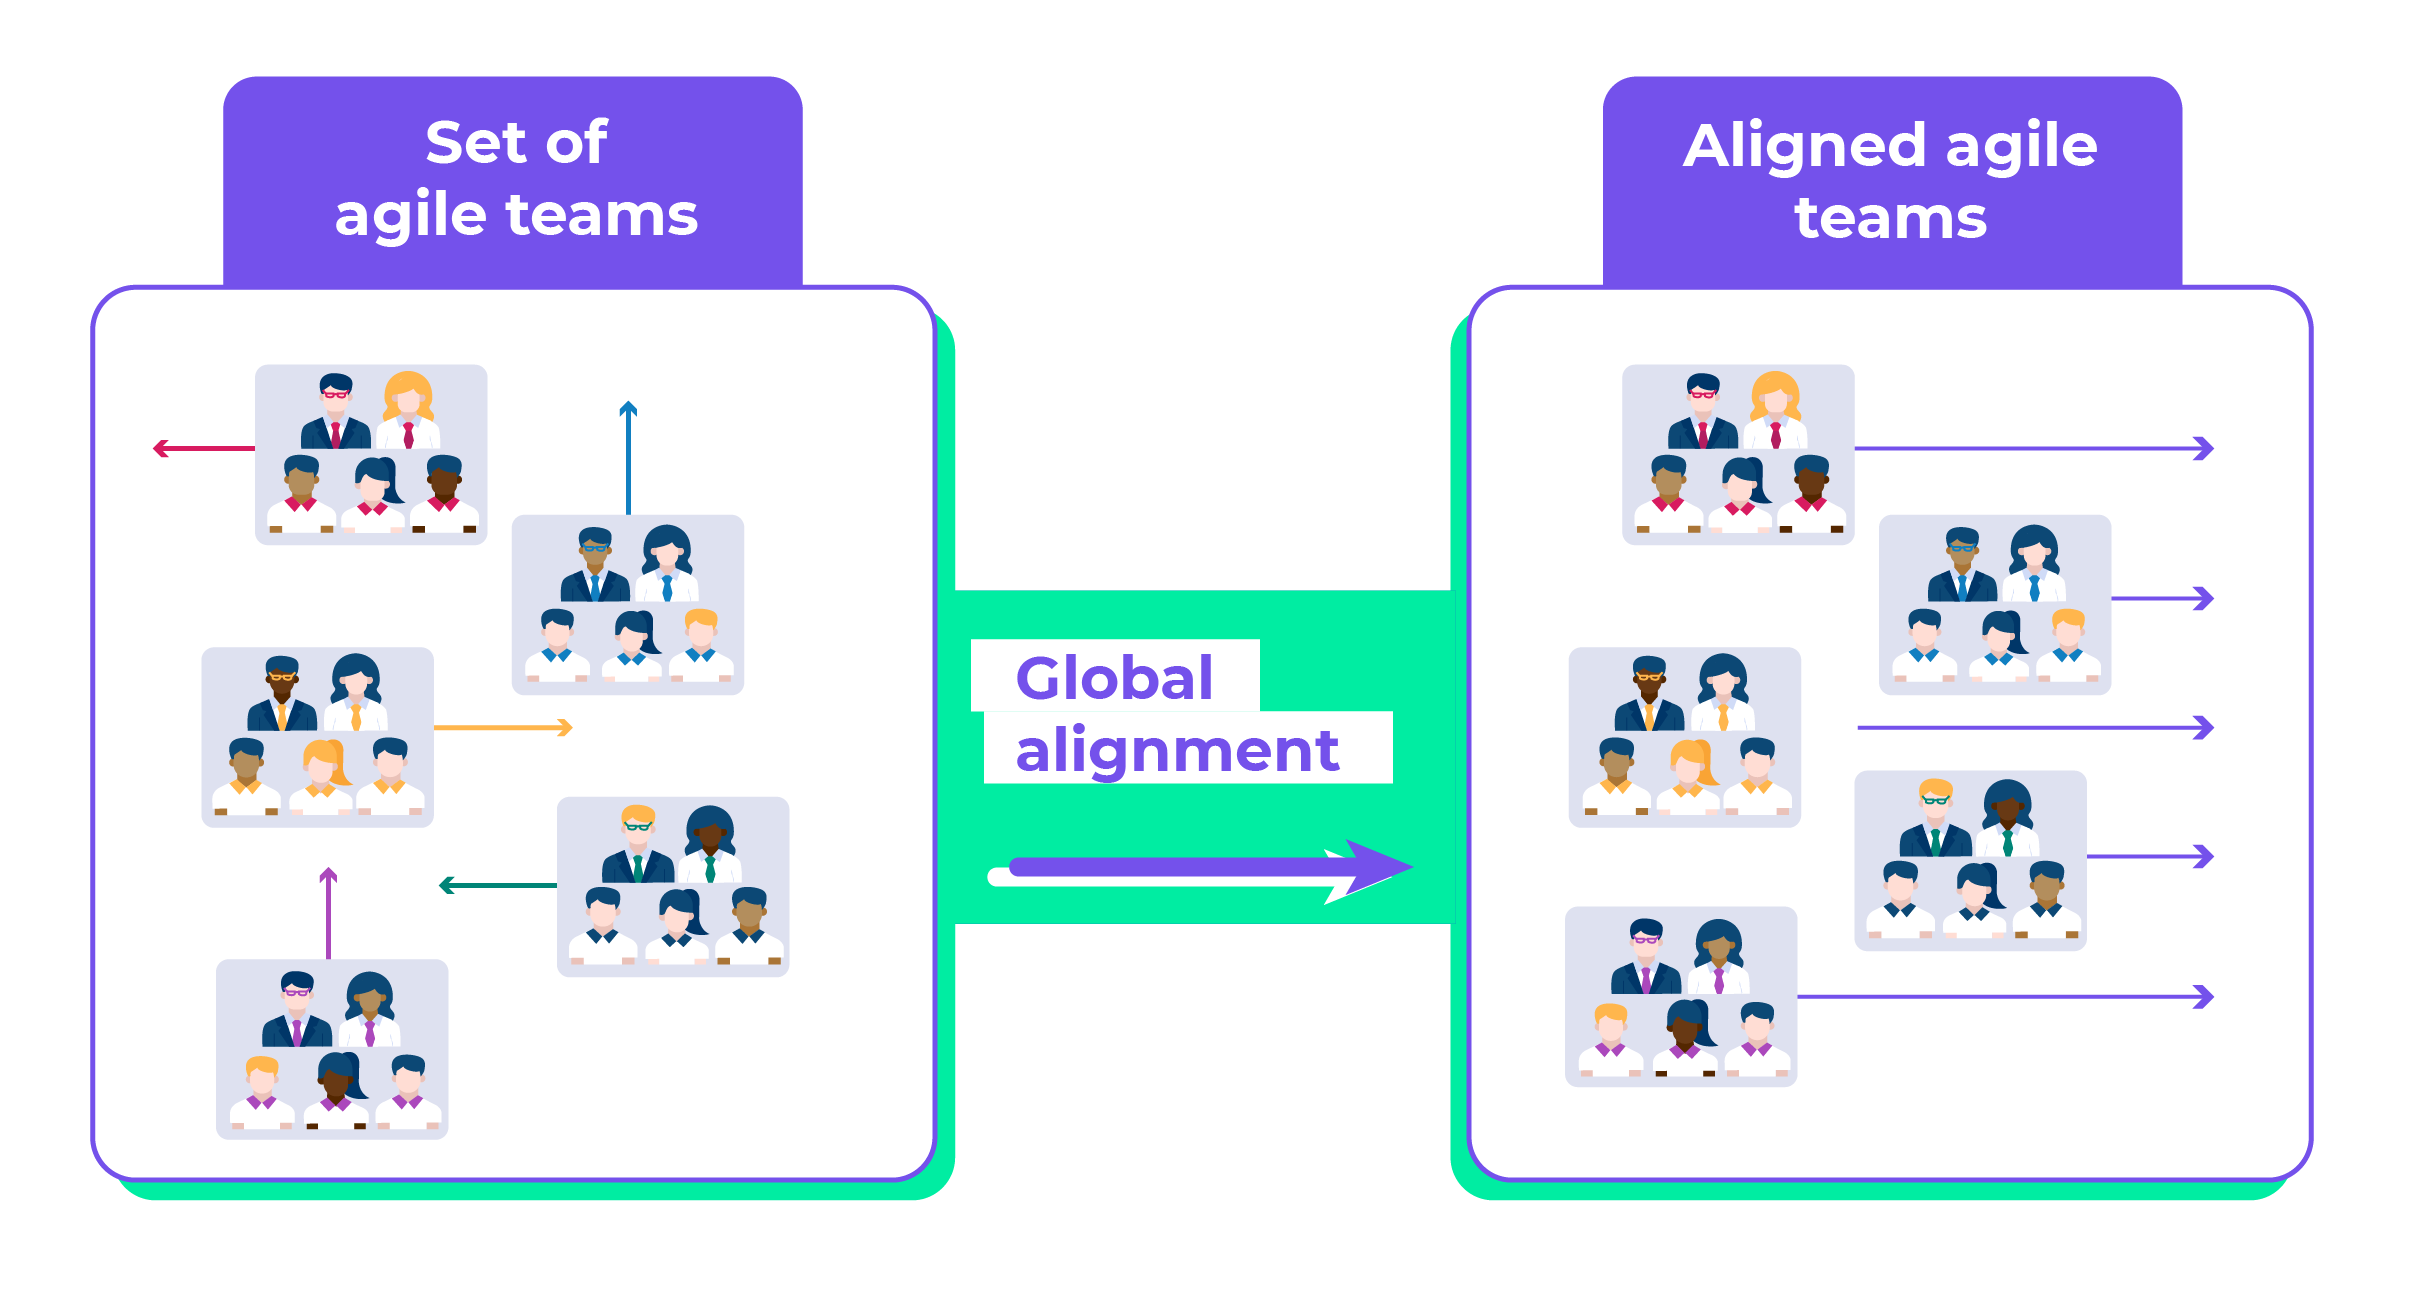 The principle of team alignment: on the left-hand side, the non-aligned teams are not moving in the same direction, while on the right, the aligned teams share a common goal.